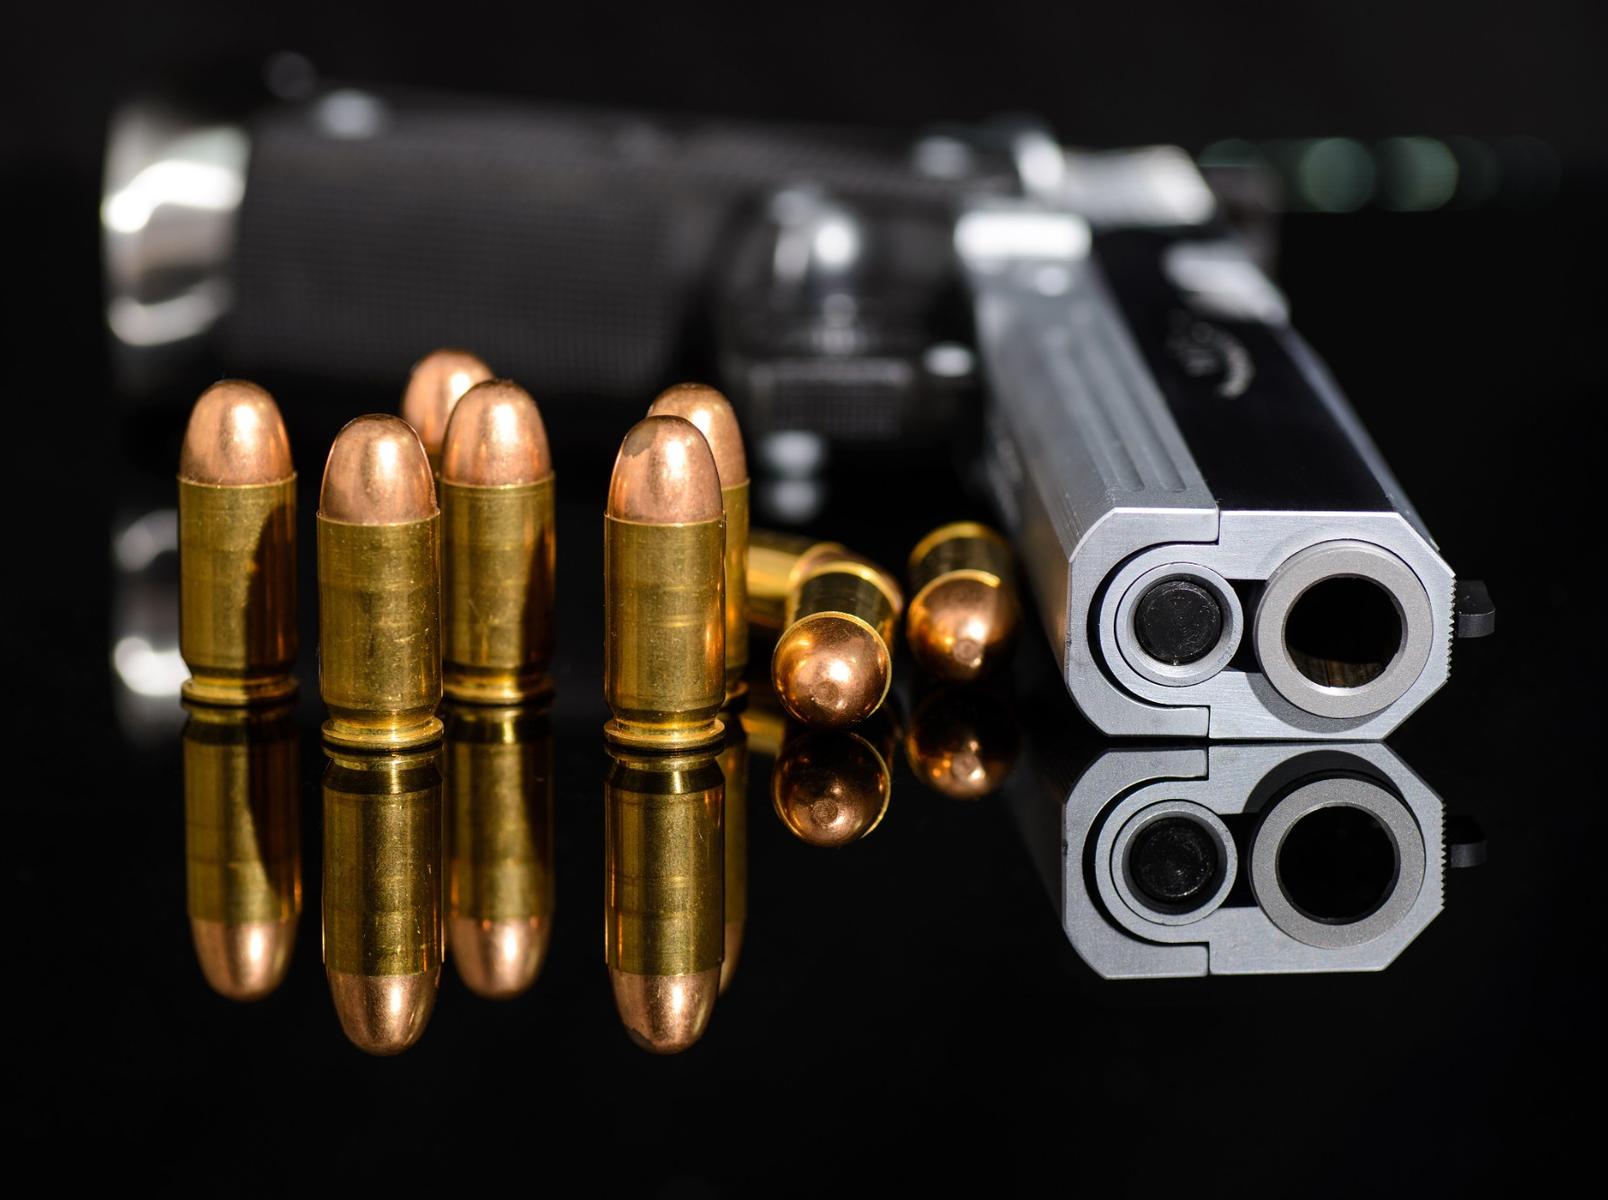 Affordable Handgun Ammo: Is It Up to Par for Your Firearms Use? - Gun Tests